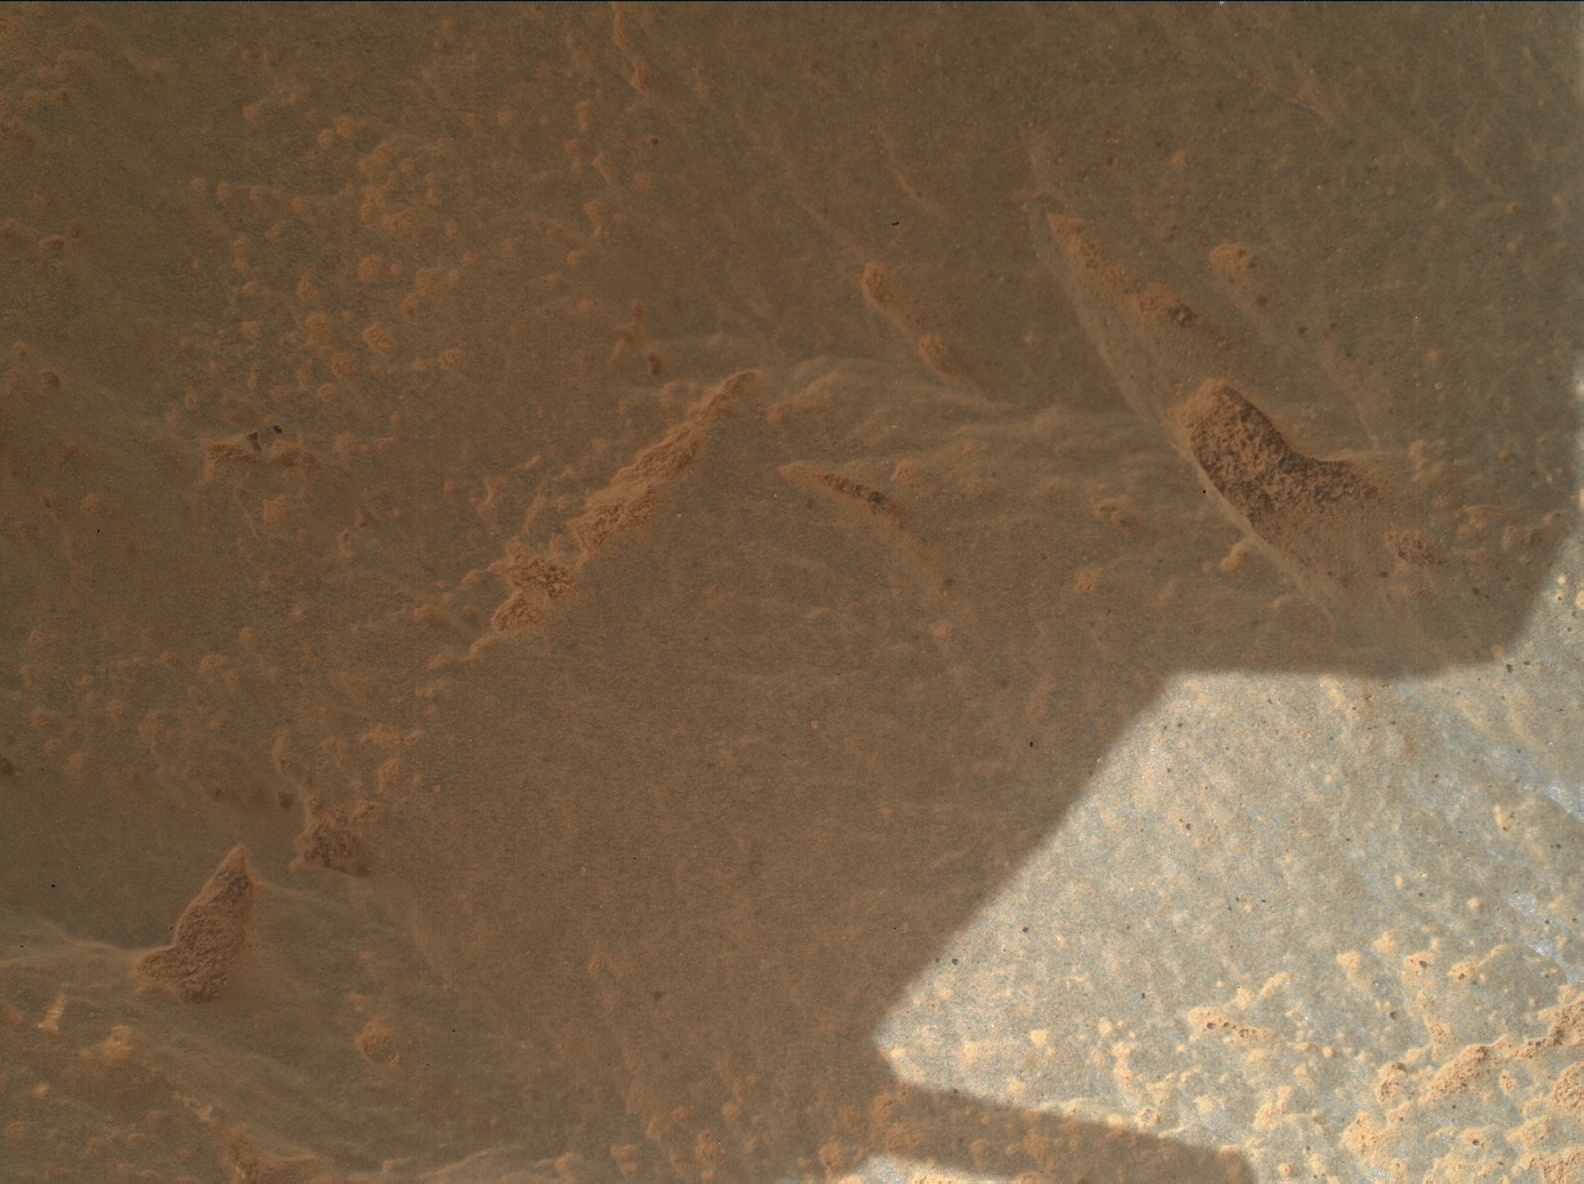 Nasa's Mars rover Curiosity acquired this image using its Mars Hand Lens Imager (MAHLI) on Sol 3436